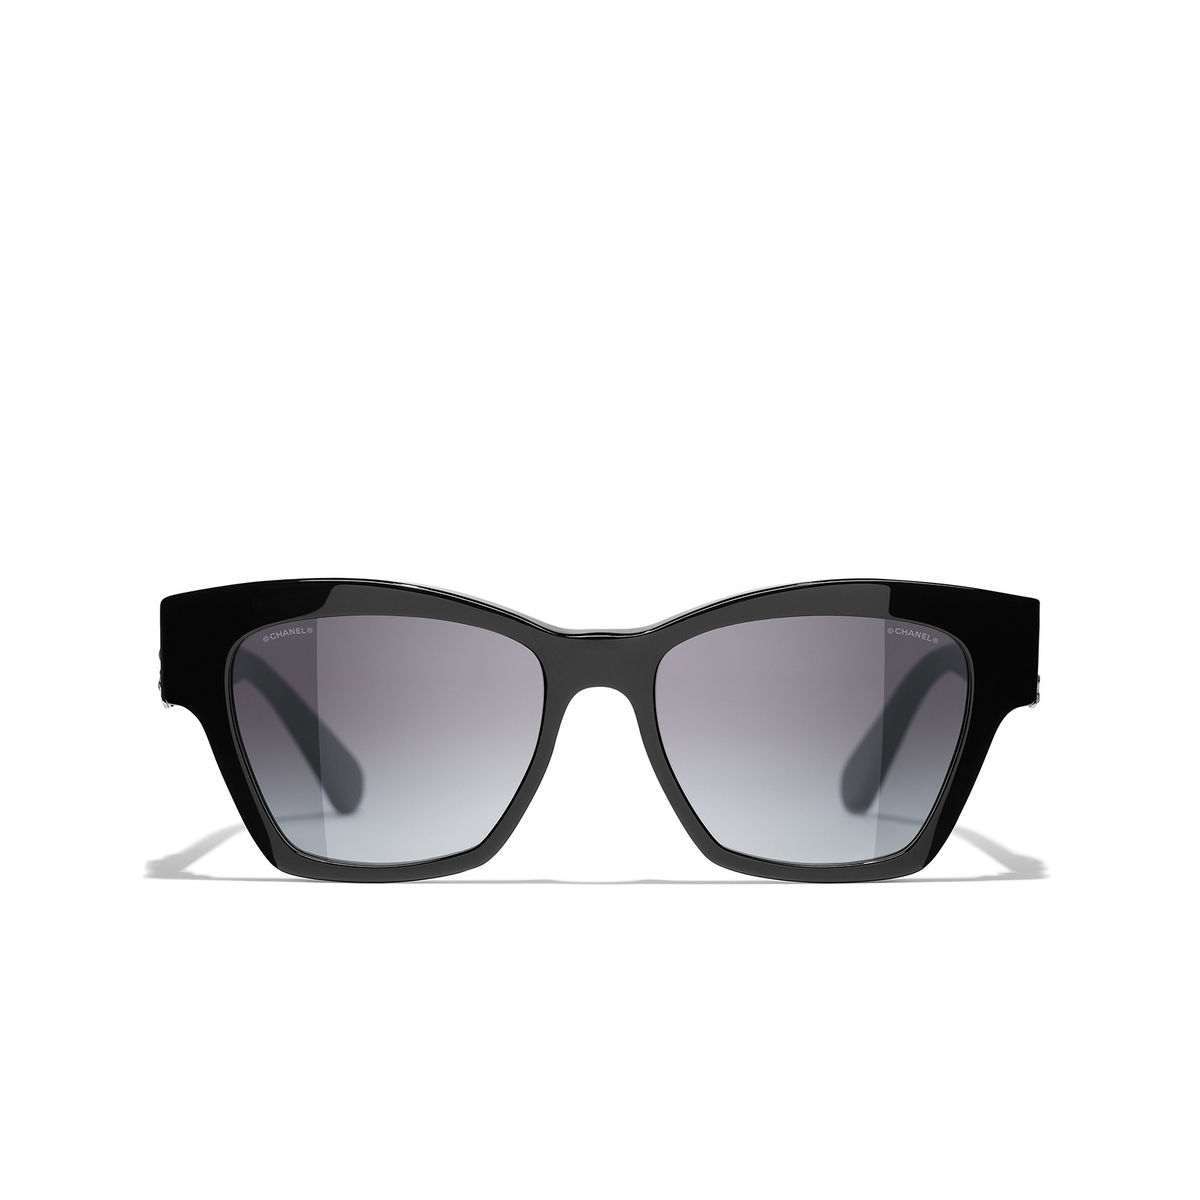 CHANEL butterfly Sunglasses C501S6 Black - front view